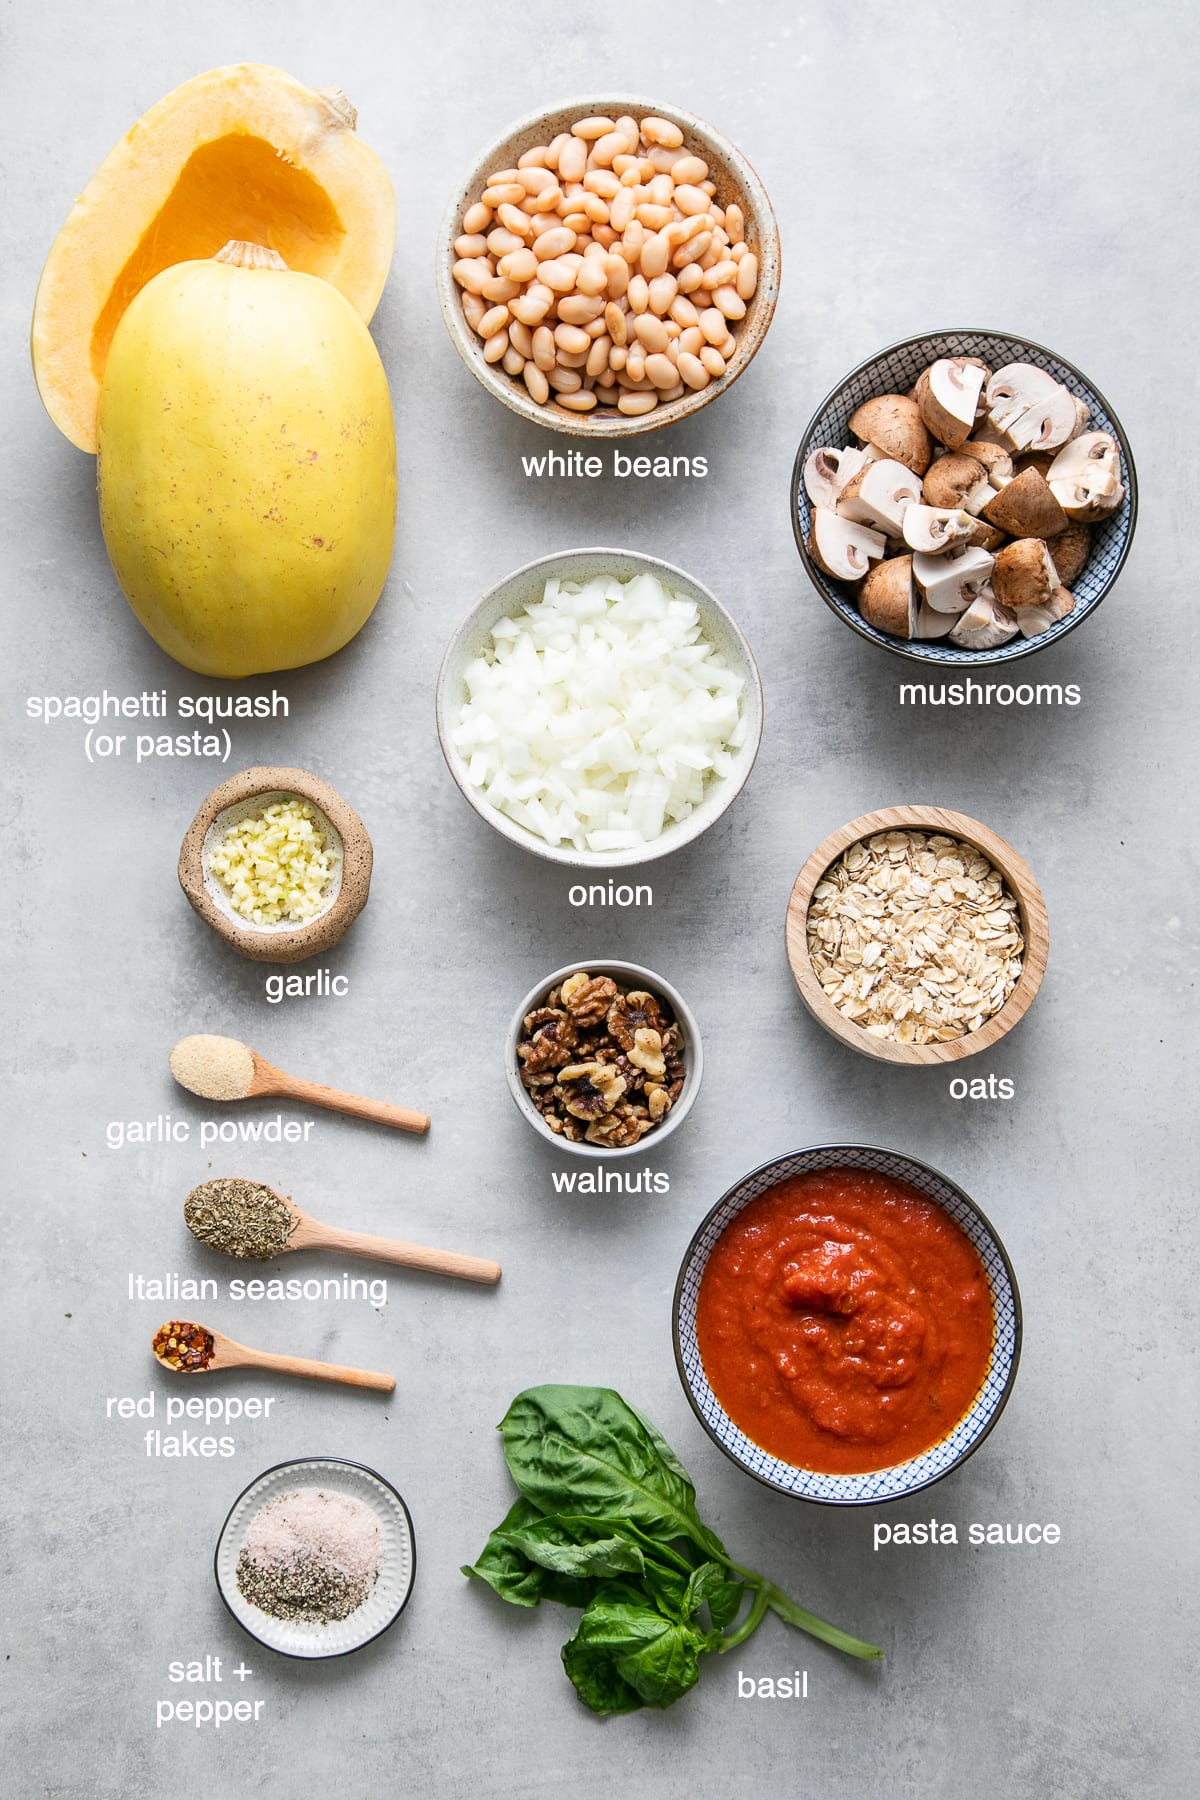 top down view of ingredients used to make spaghetti and vegan meatballs.